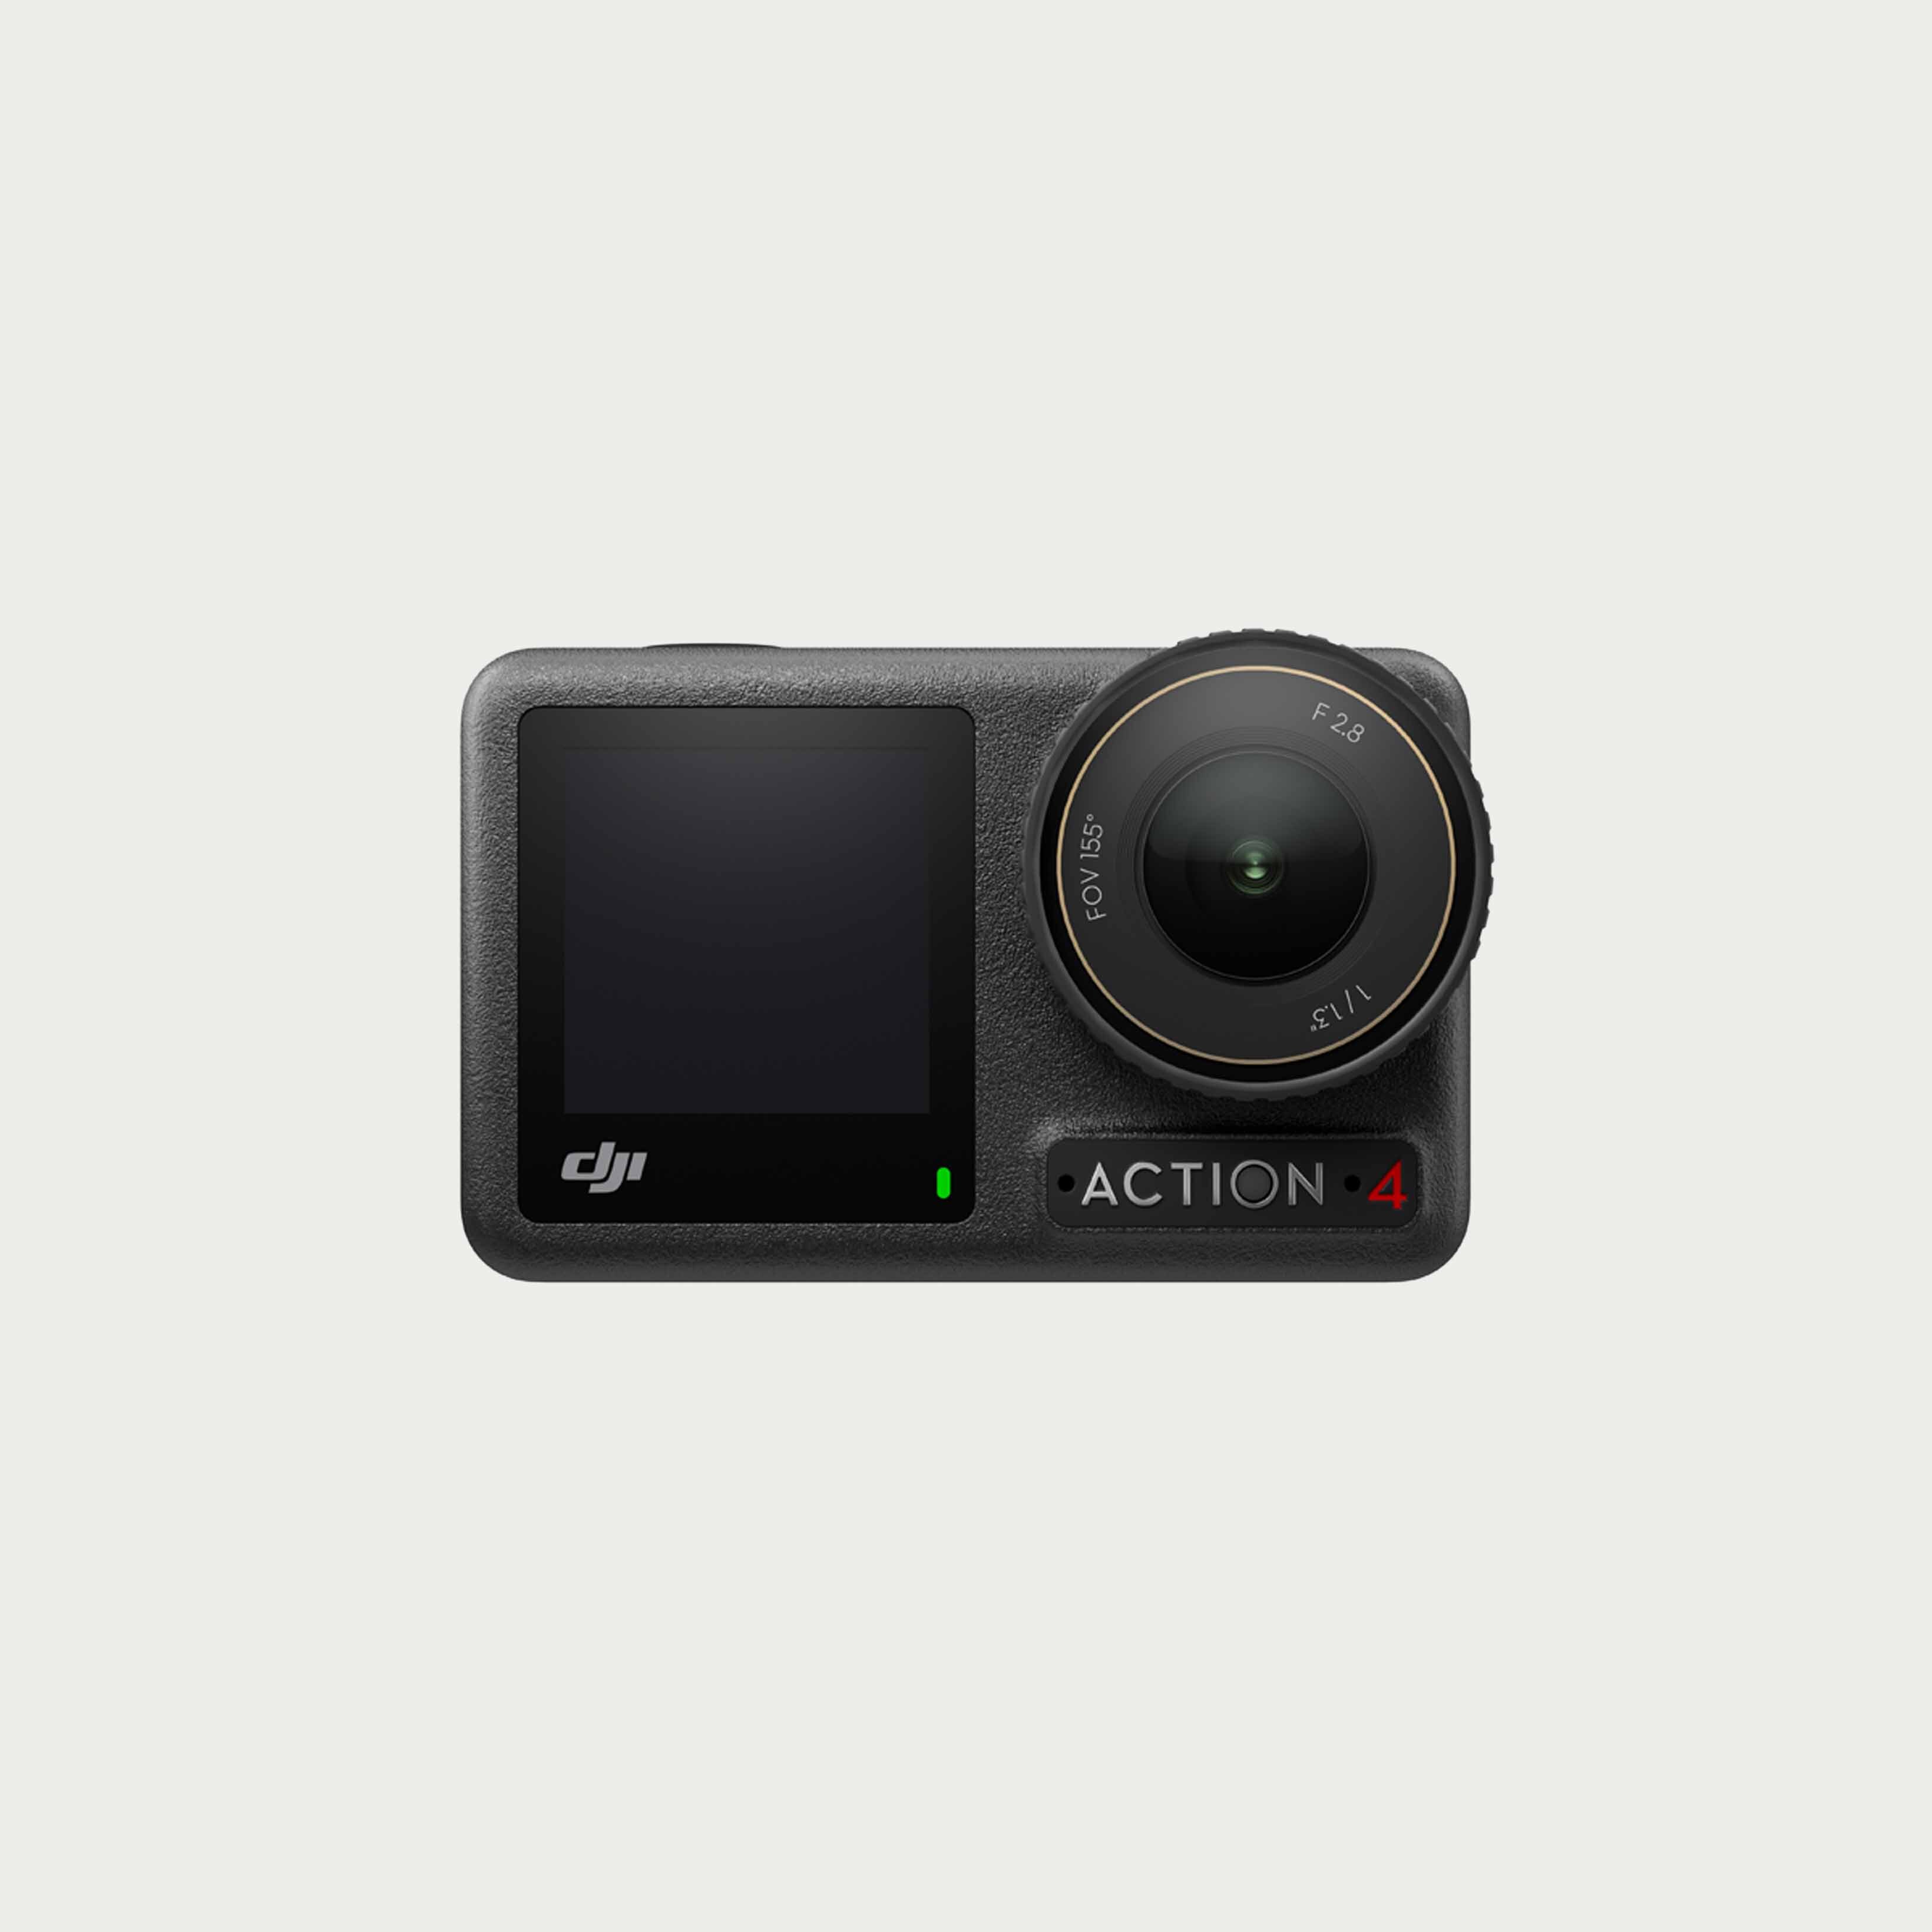 The DJI Osmo Action 4 Brings a Bigger Sensor and Improved Low